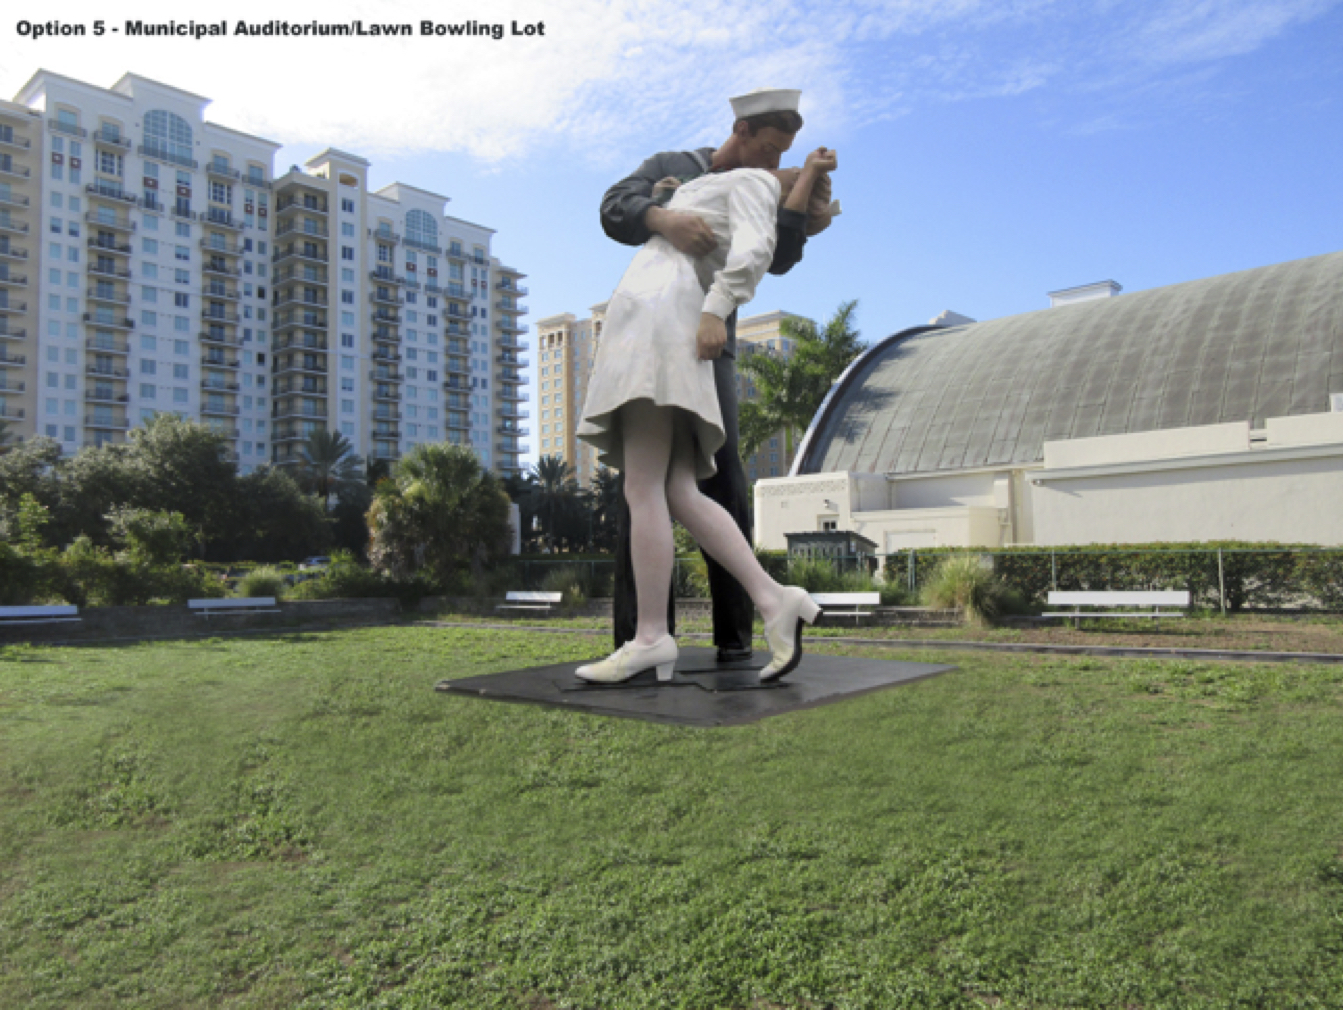 City staff produced mockups of Unconditional Surrender at several public sites as conversations continue about the future of the artwork. Image courtesy city of Sarasota.